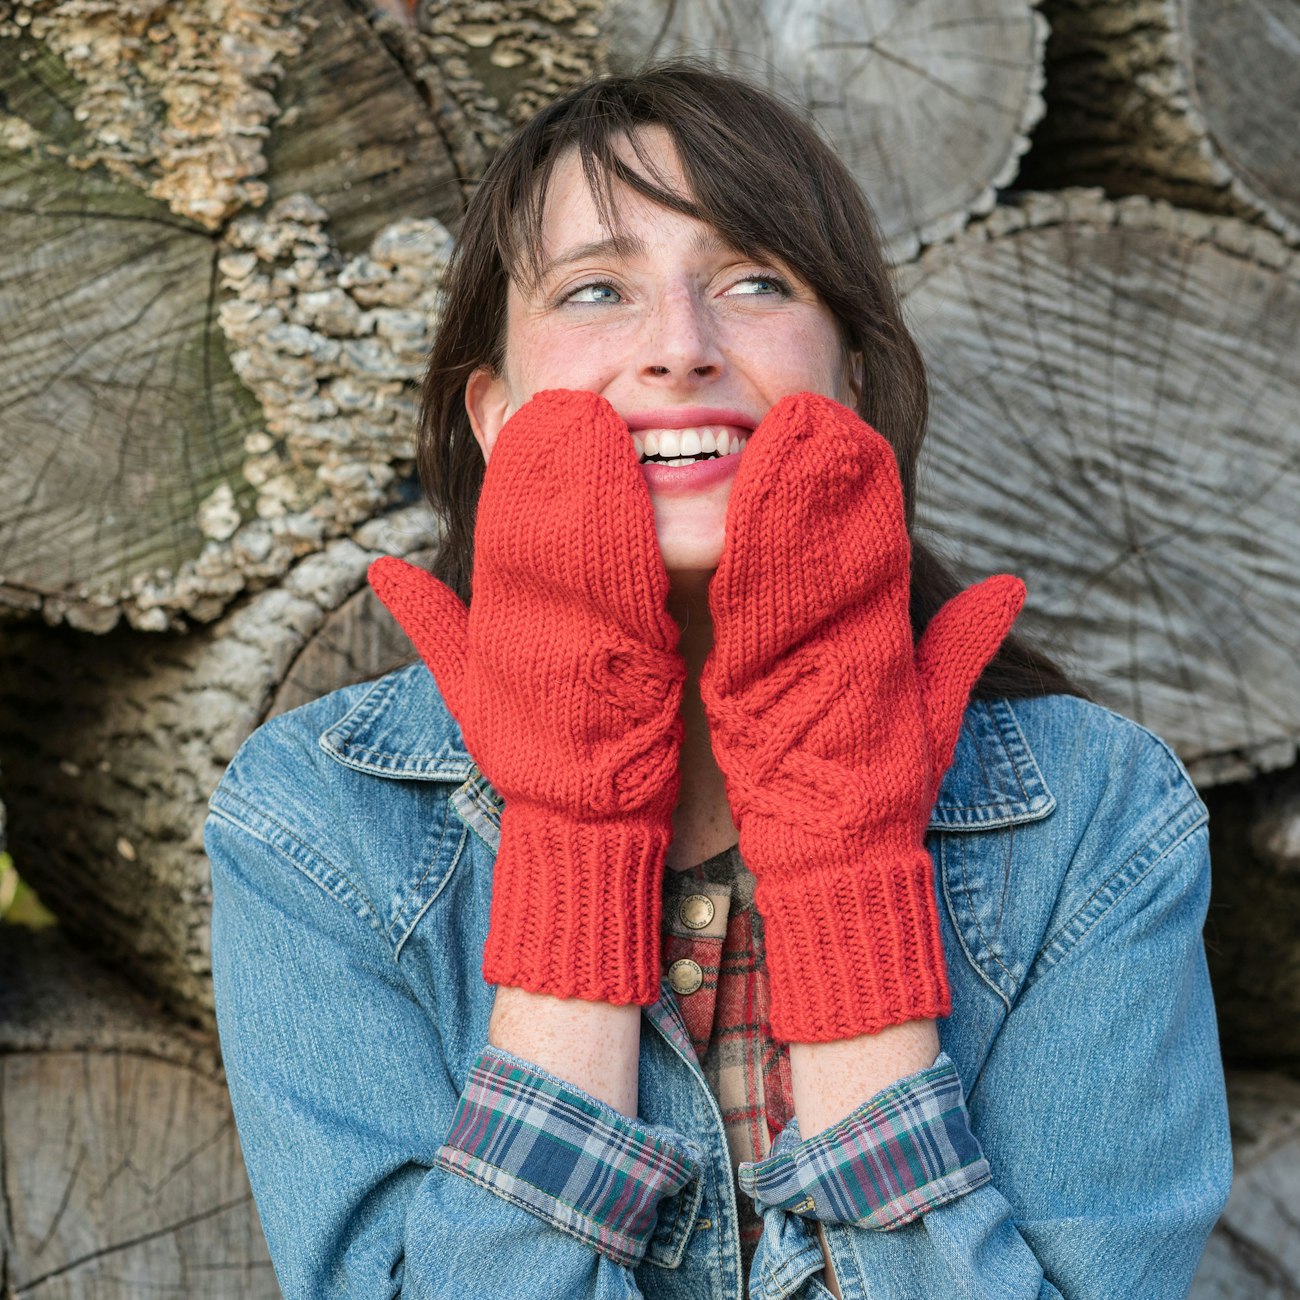 Brown-haired woman wearing red mittens up to her face